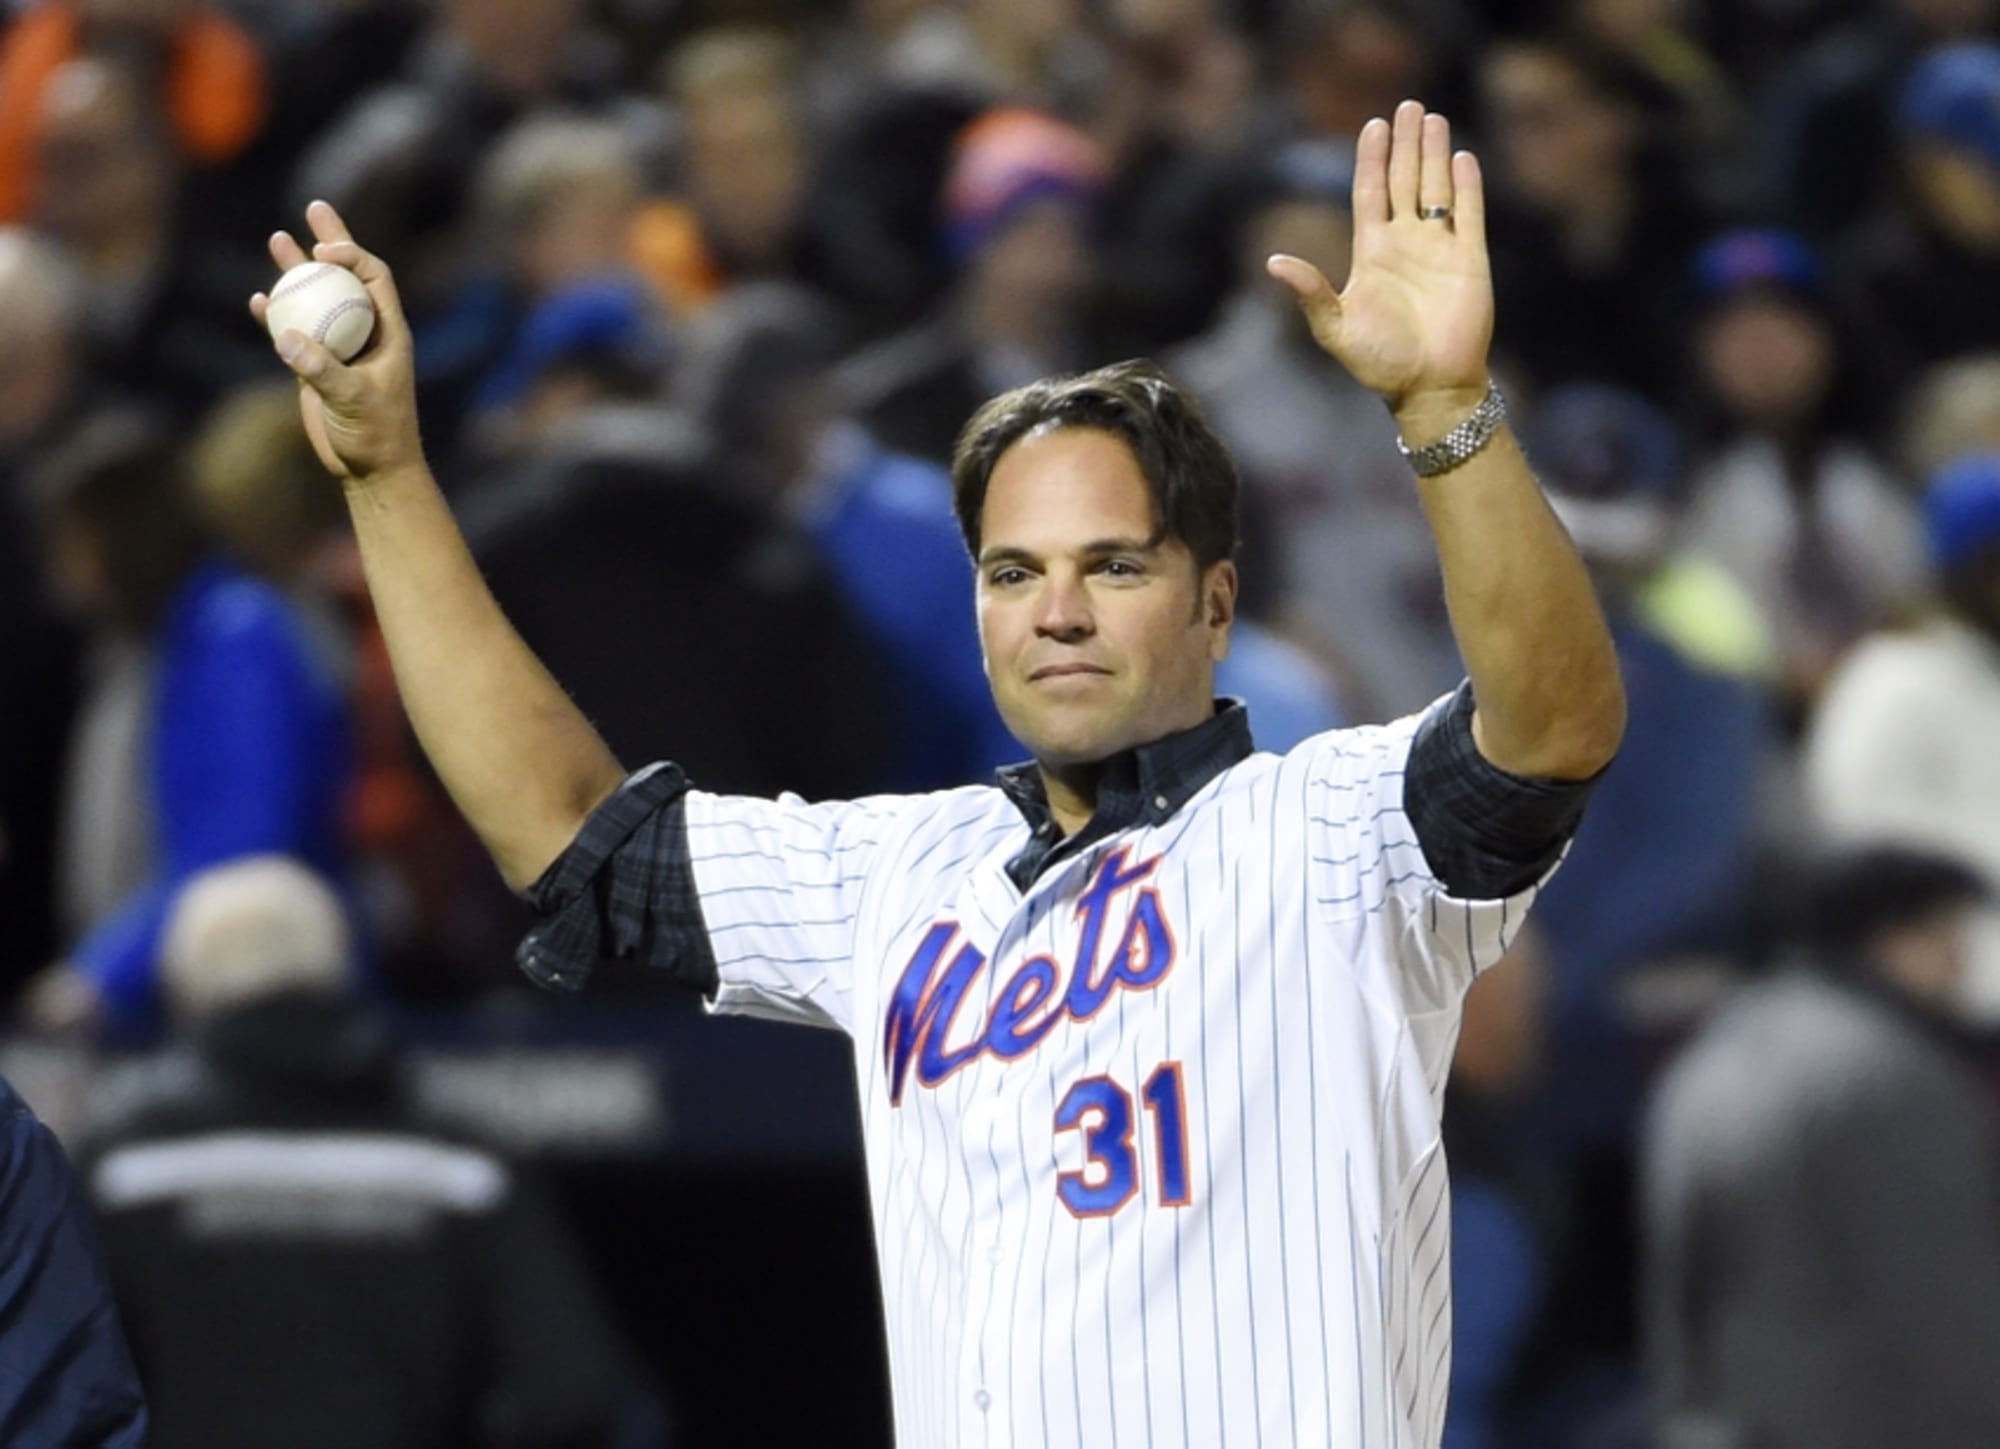 New York Mets' catcher Mike Piazza appears on the ground before a